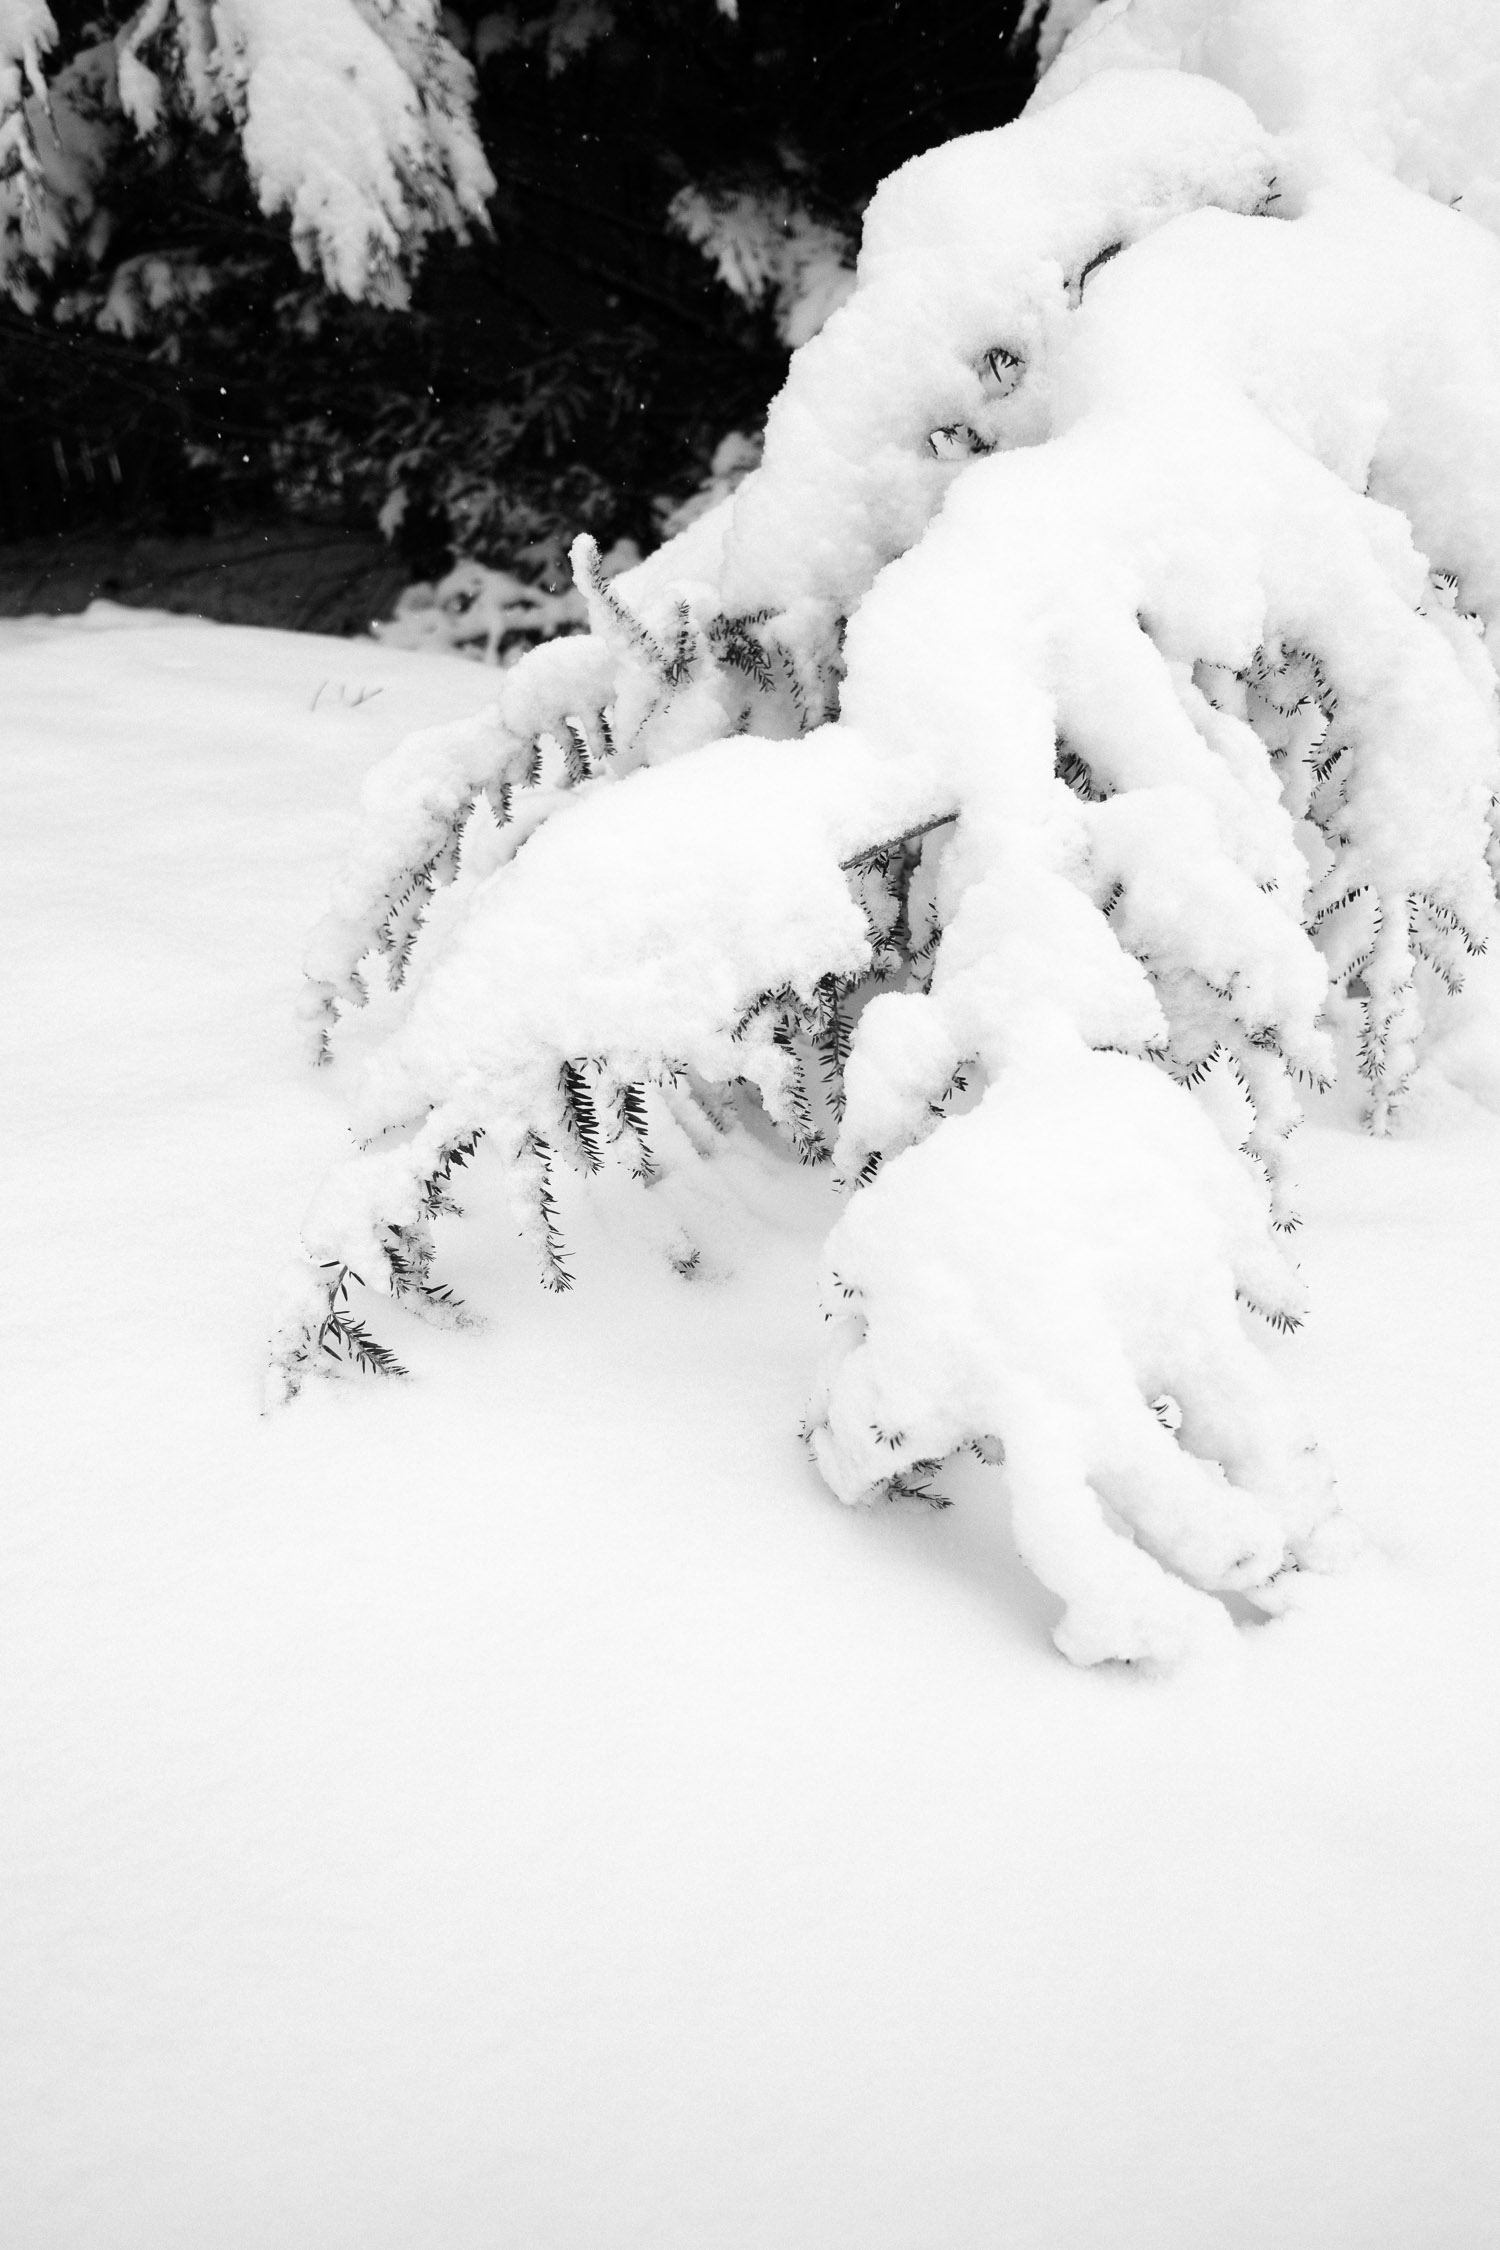 another heavy snow-covered pine tree branch on the ground